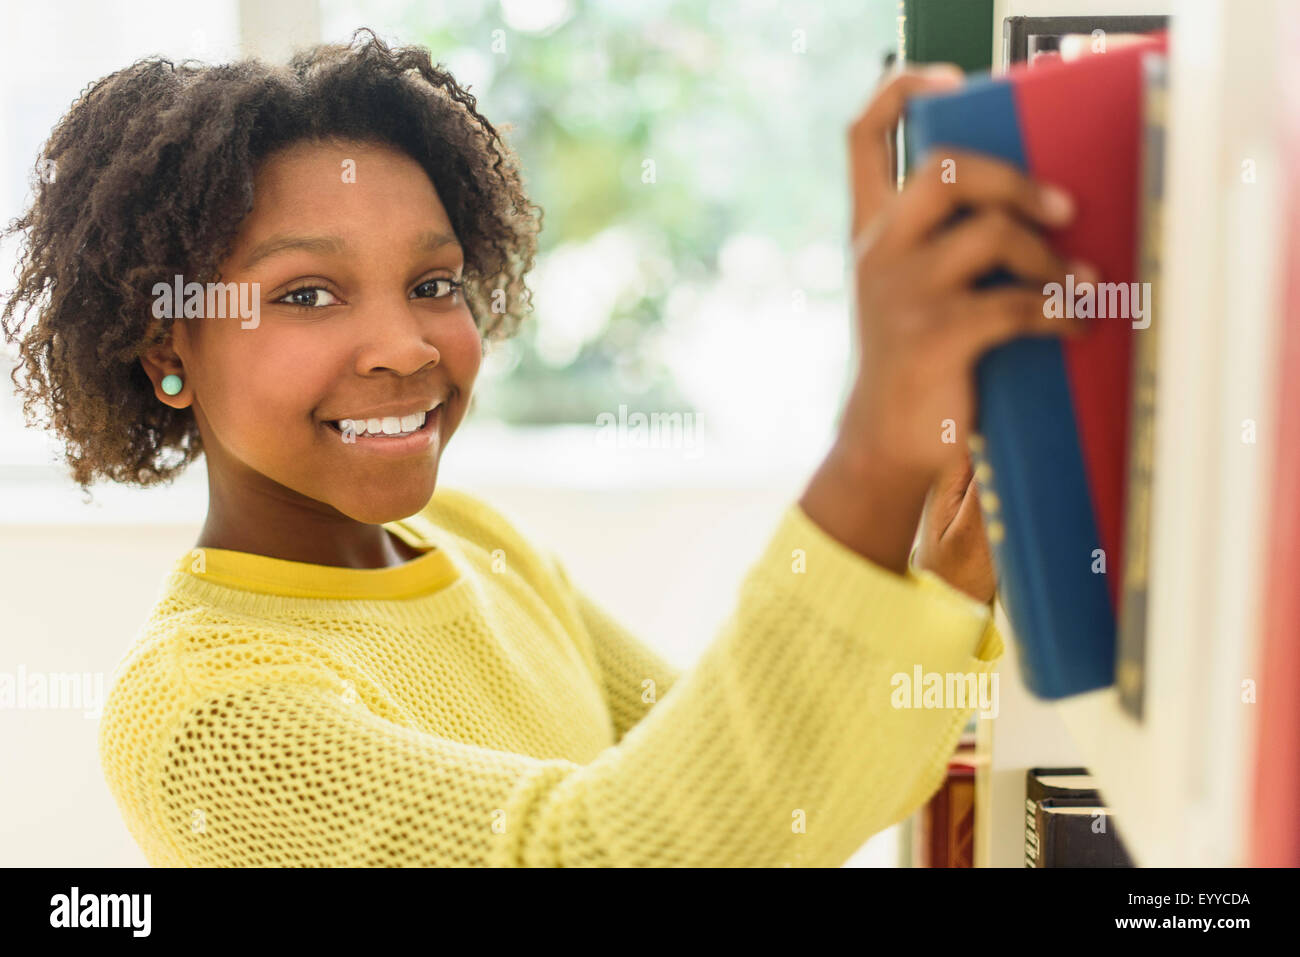 Black student choosing book from library shelf Stock Photo